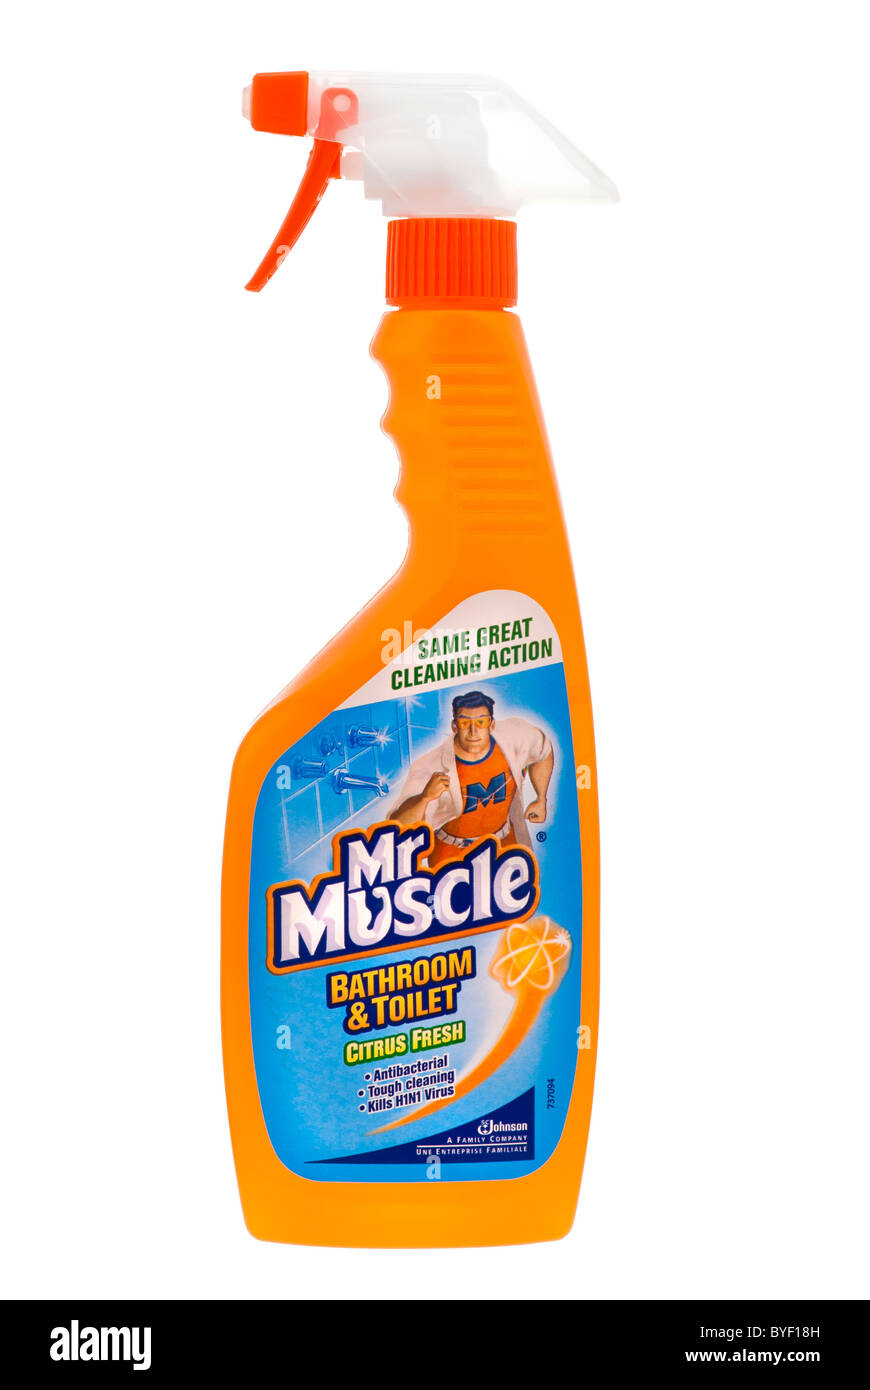 https://c8.alamy.com/comp/BYF18H/mr-muscle-cleaning-spray-BYF18H.jpg